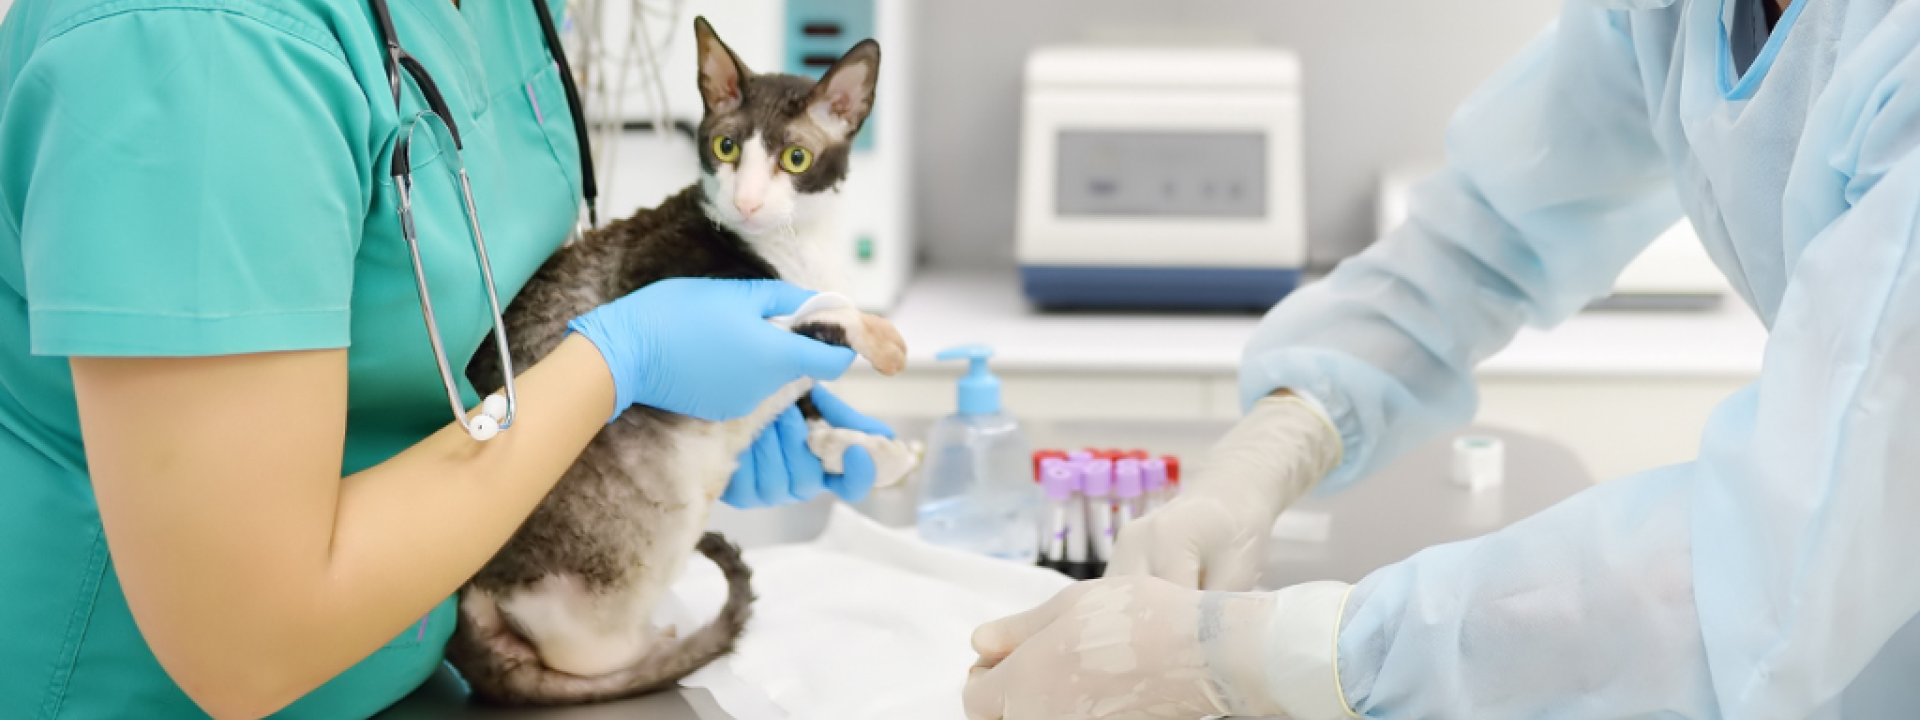 Routine bloodwork for cats